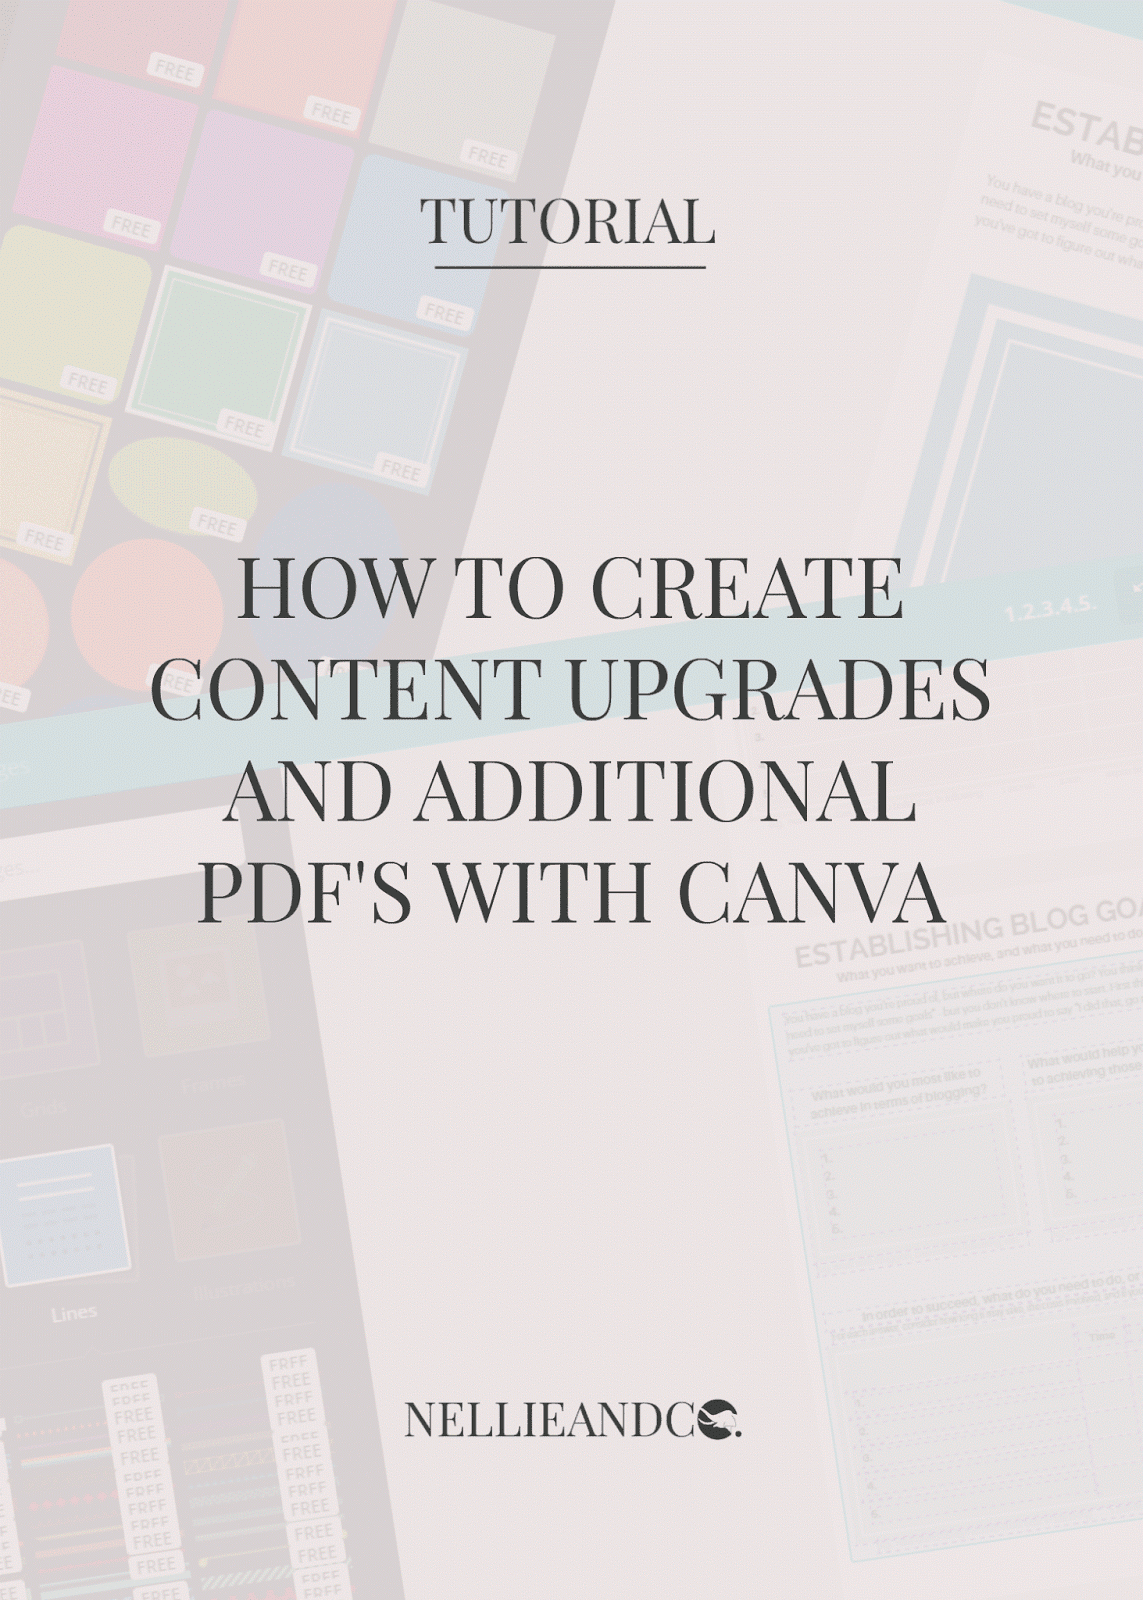 You don't need to use Adobe to create your PDF files or content upgrades, you can use Canva instead. Check out the secret and how I used Canva to create a Goal Planner!